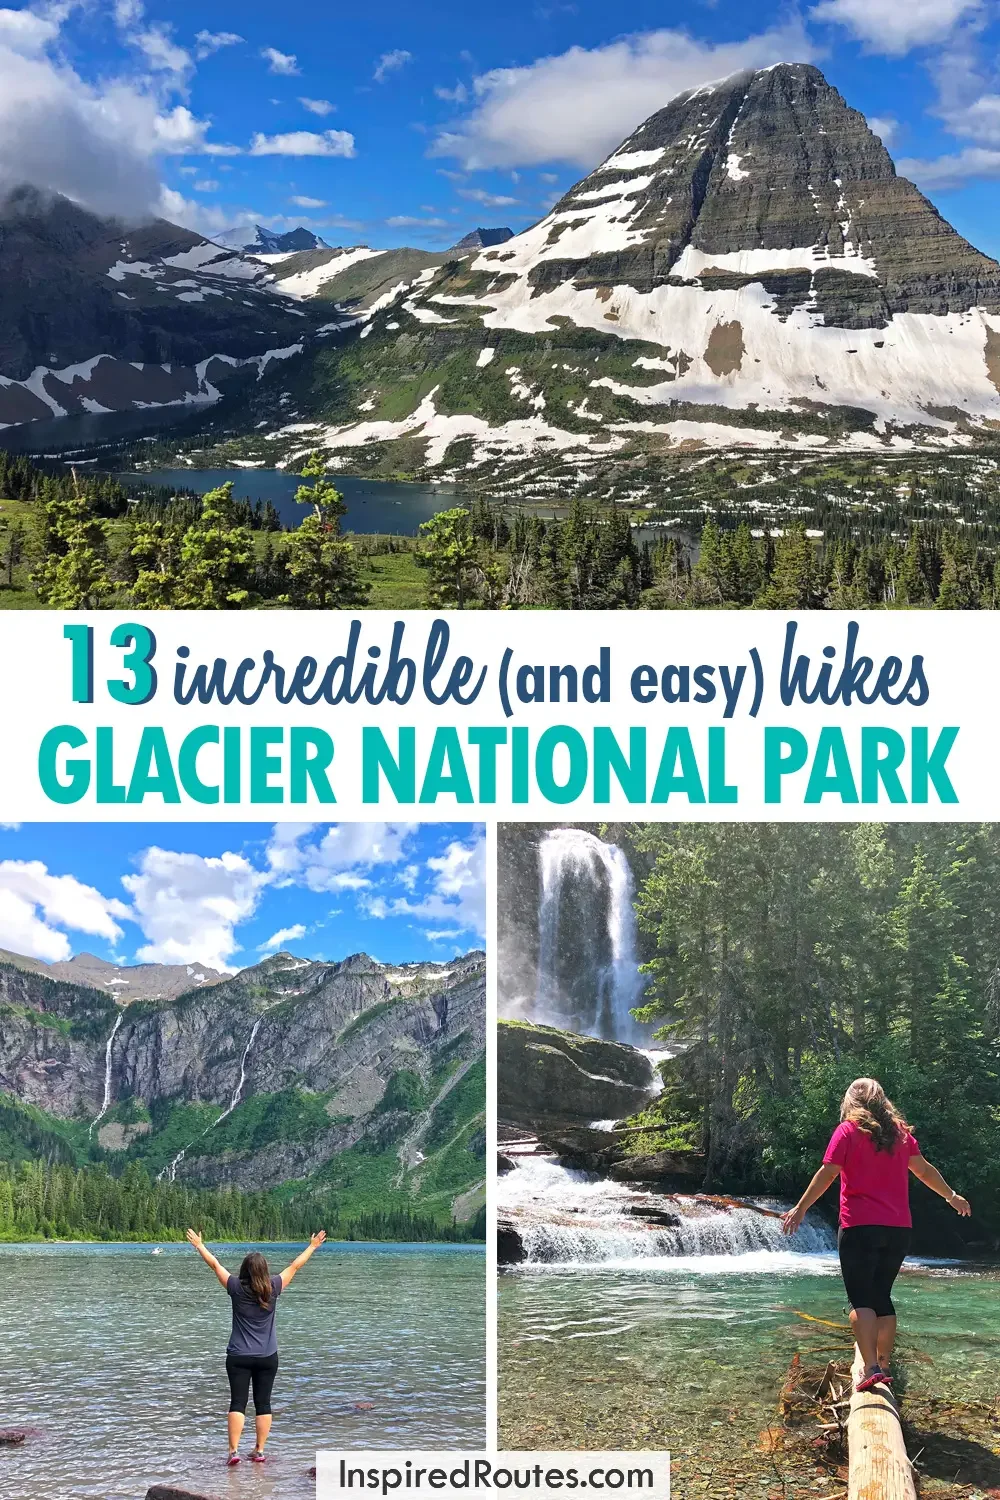 13 incredible and easy hikes glacier national park with photos of mountain and lake, woman standing at mountain and on log near waterfall